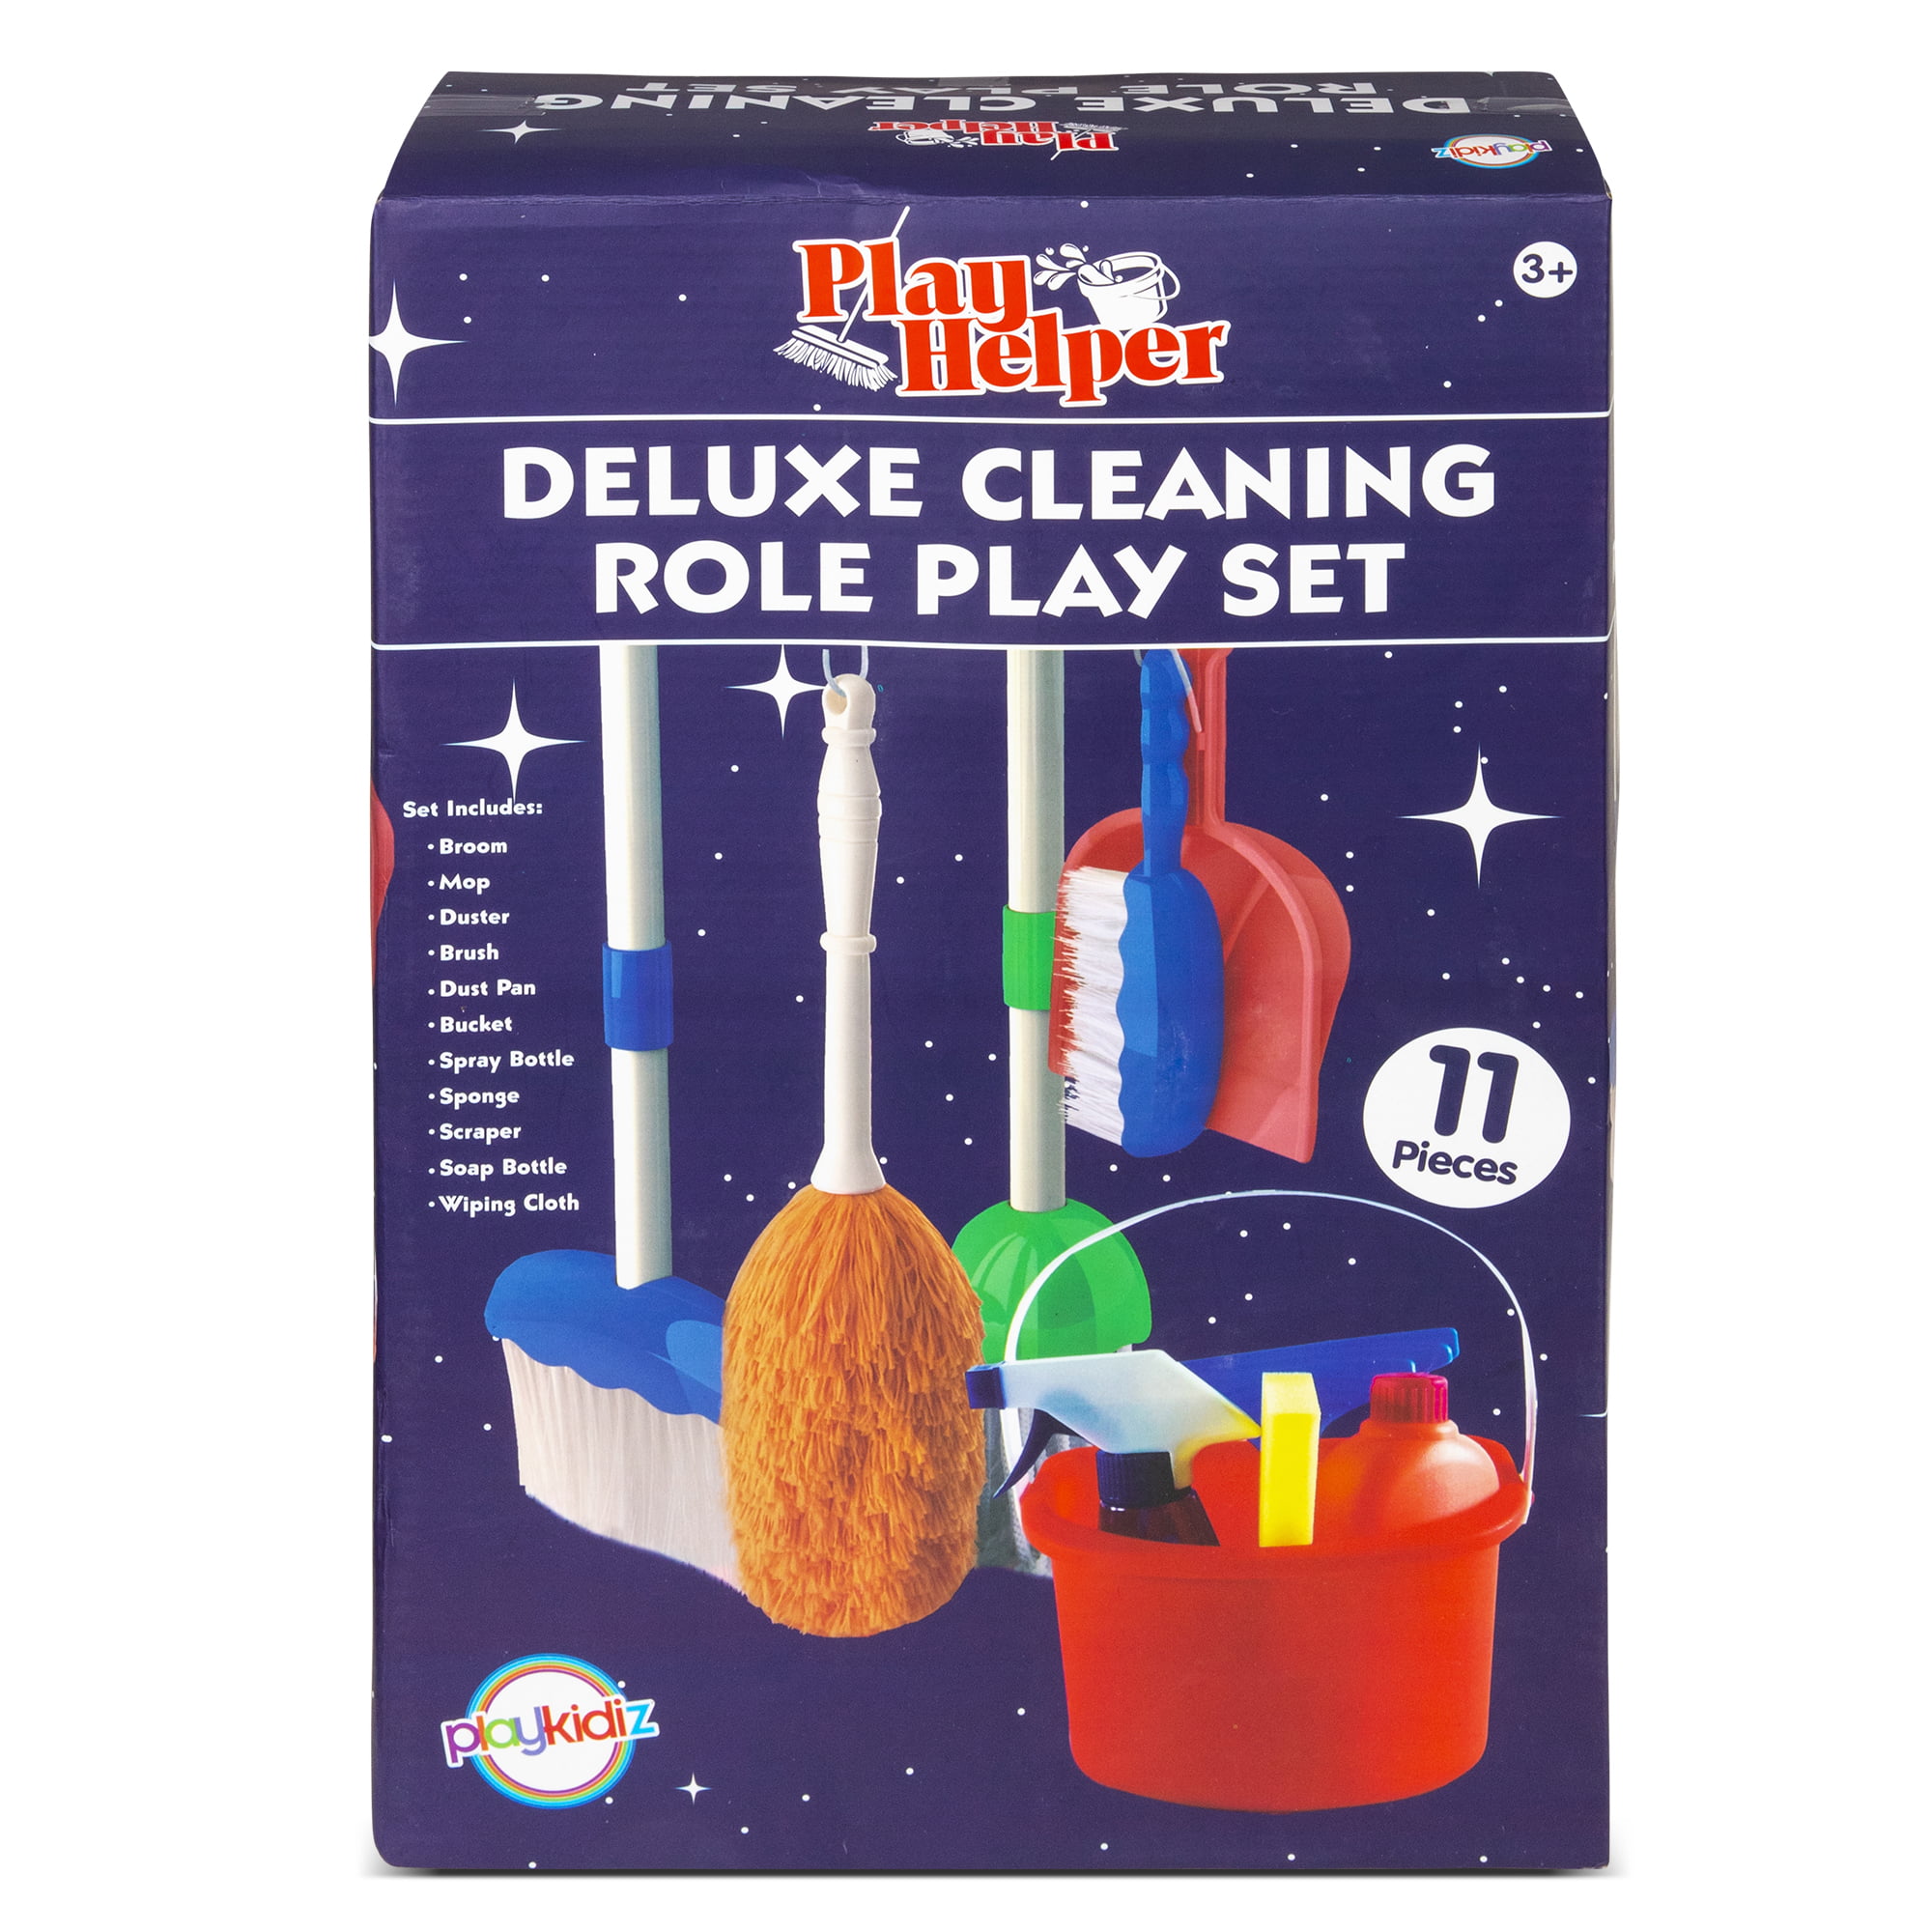 Playkidz Cleaning Role Set, 6pcs, Includes Mop, Brush, Broom, Dustpan, and Organizer Stand, Play Helper Realistic Housekeeping Set, Recommended for